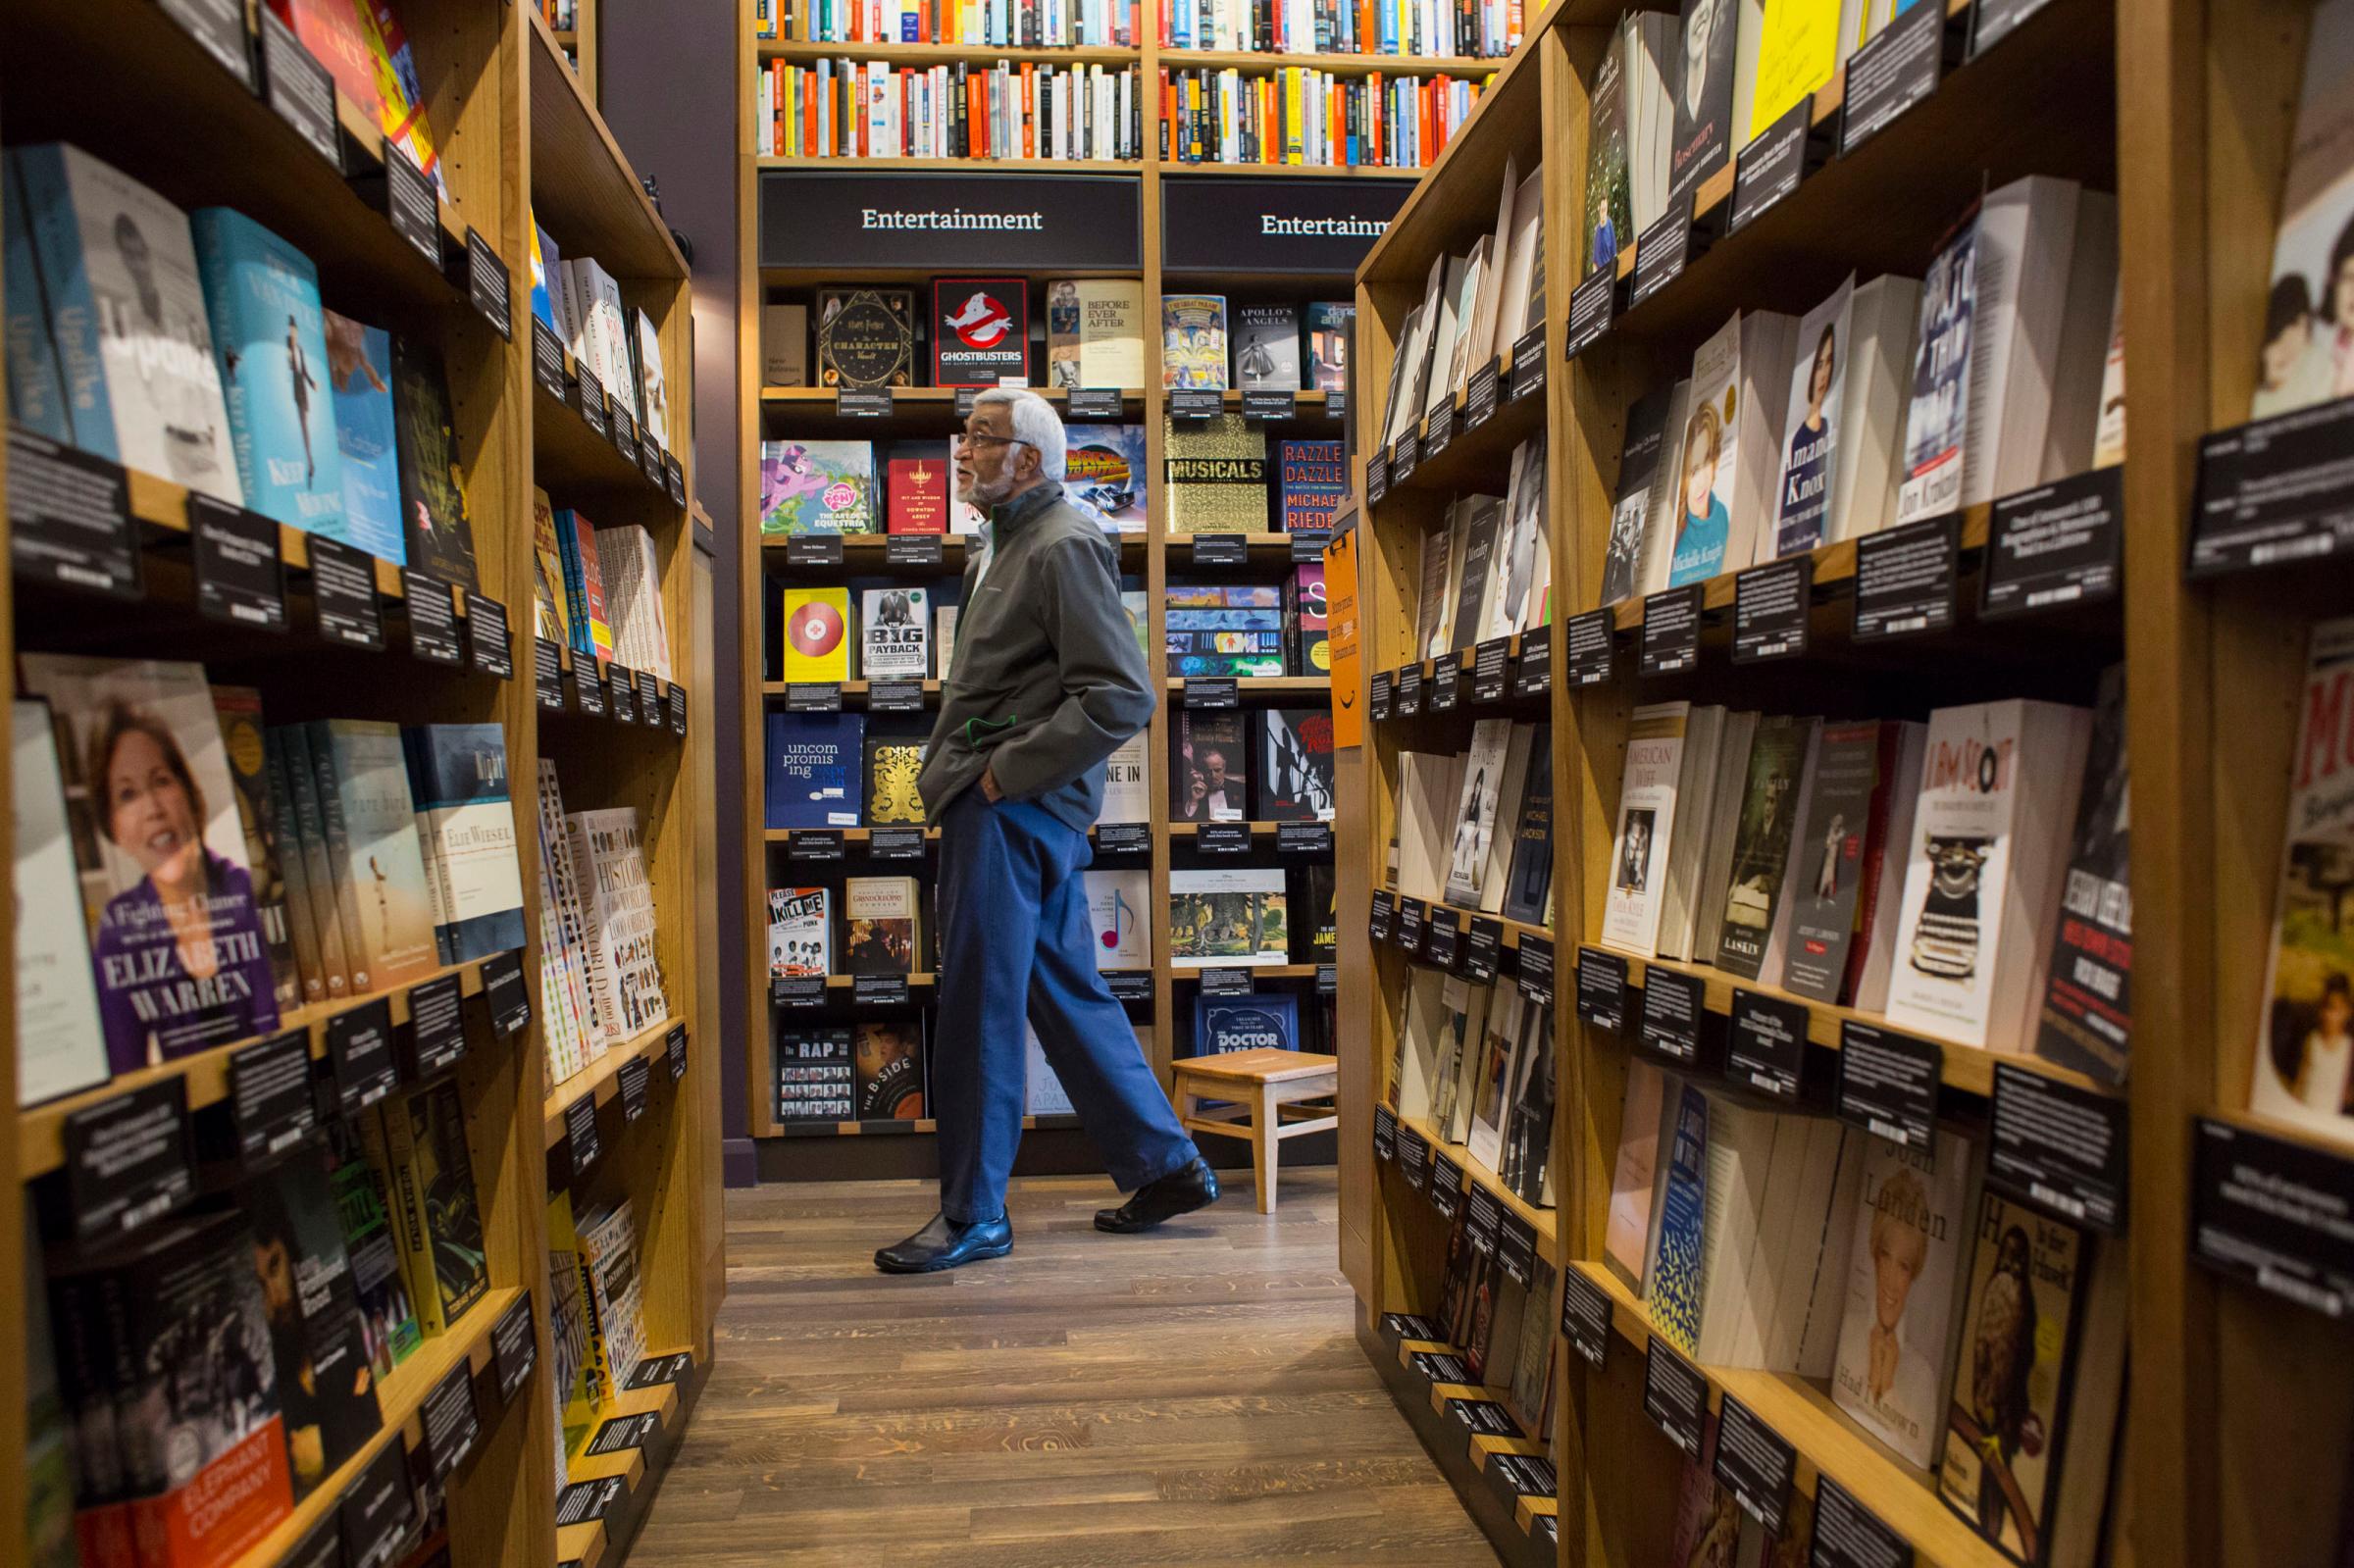 A customer shops at Amazon Books in Seattle, Washington, on Tuesday, Nov. 3, 2015. The online retailer Amazon.com Inc. opened its first brick-and-mortar location in Seattle's upscale University Village mall. Photographer: David Ryder/Bloomberg